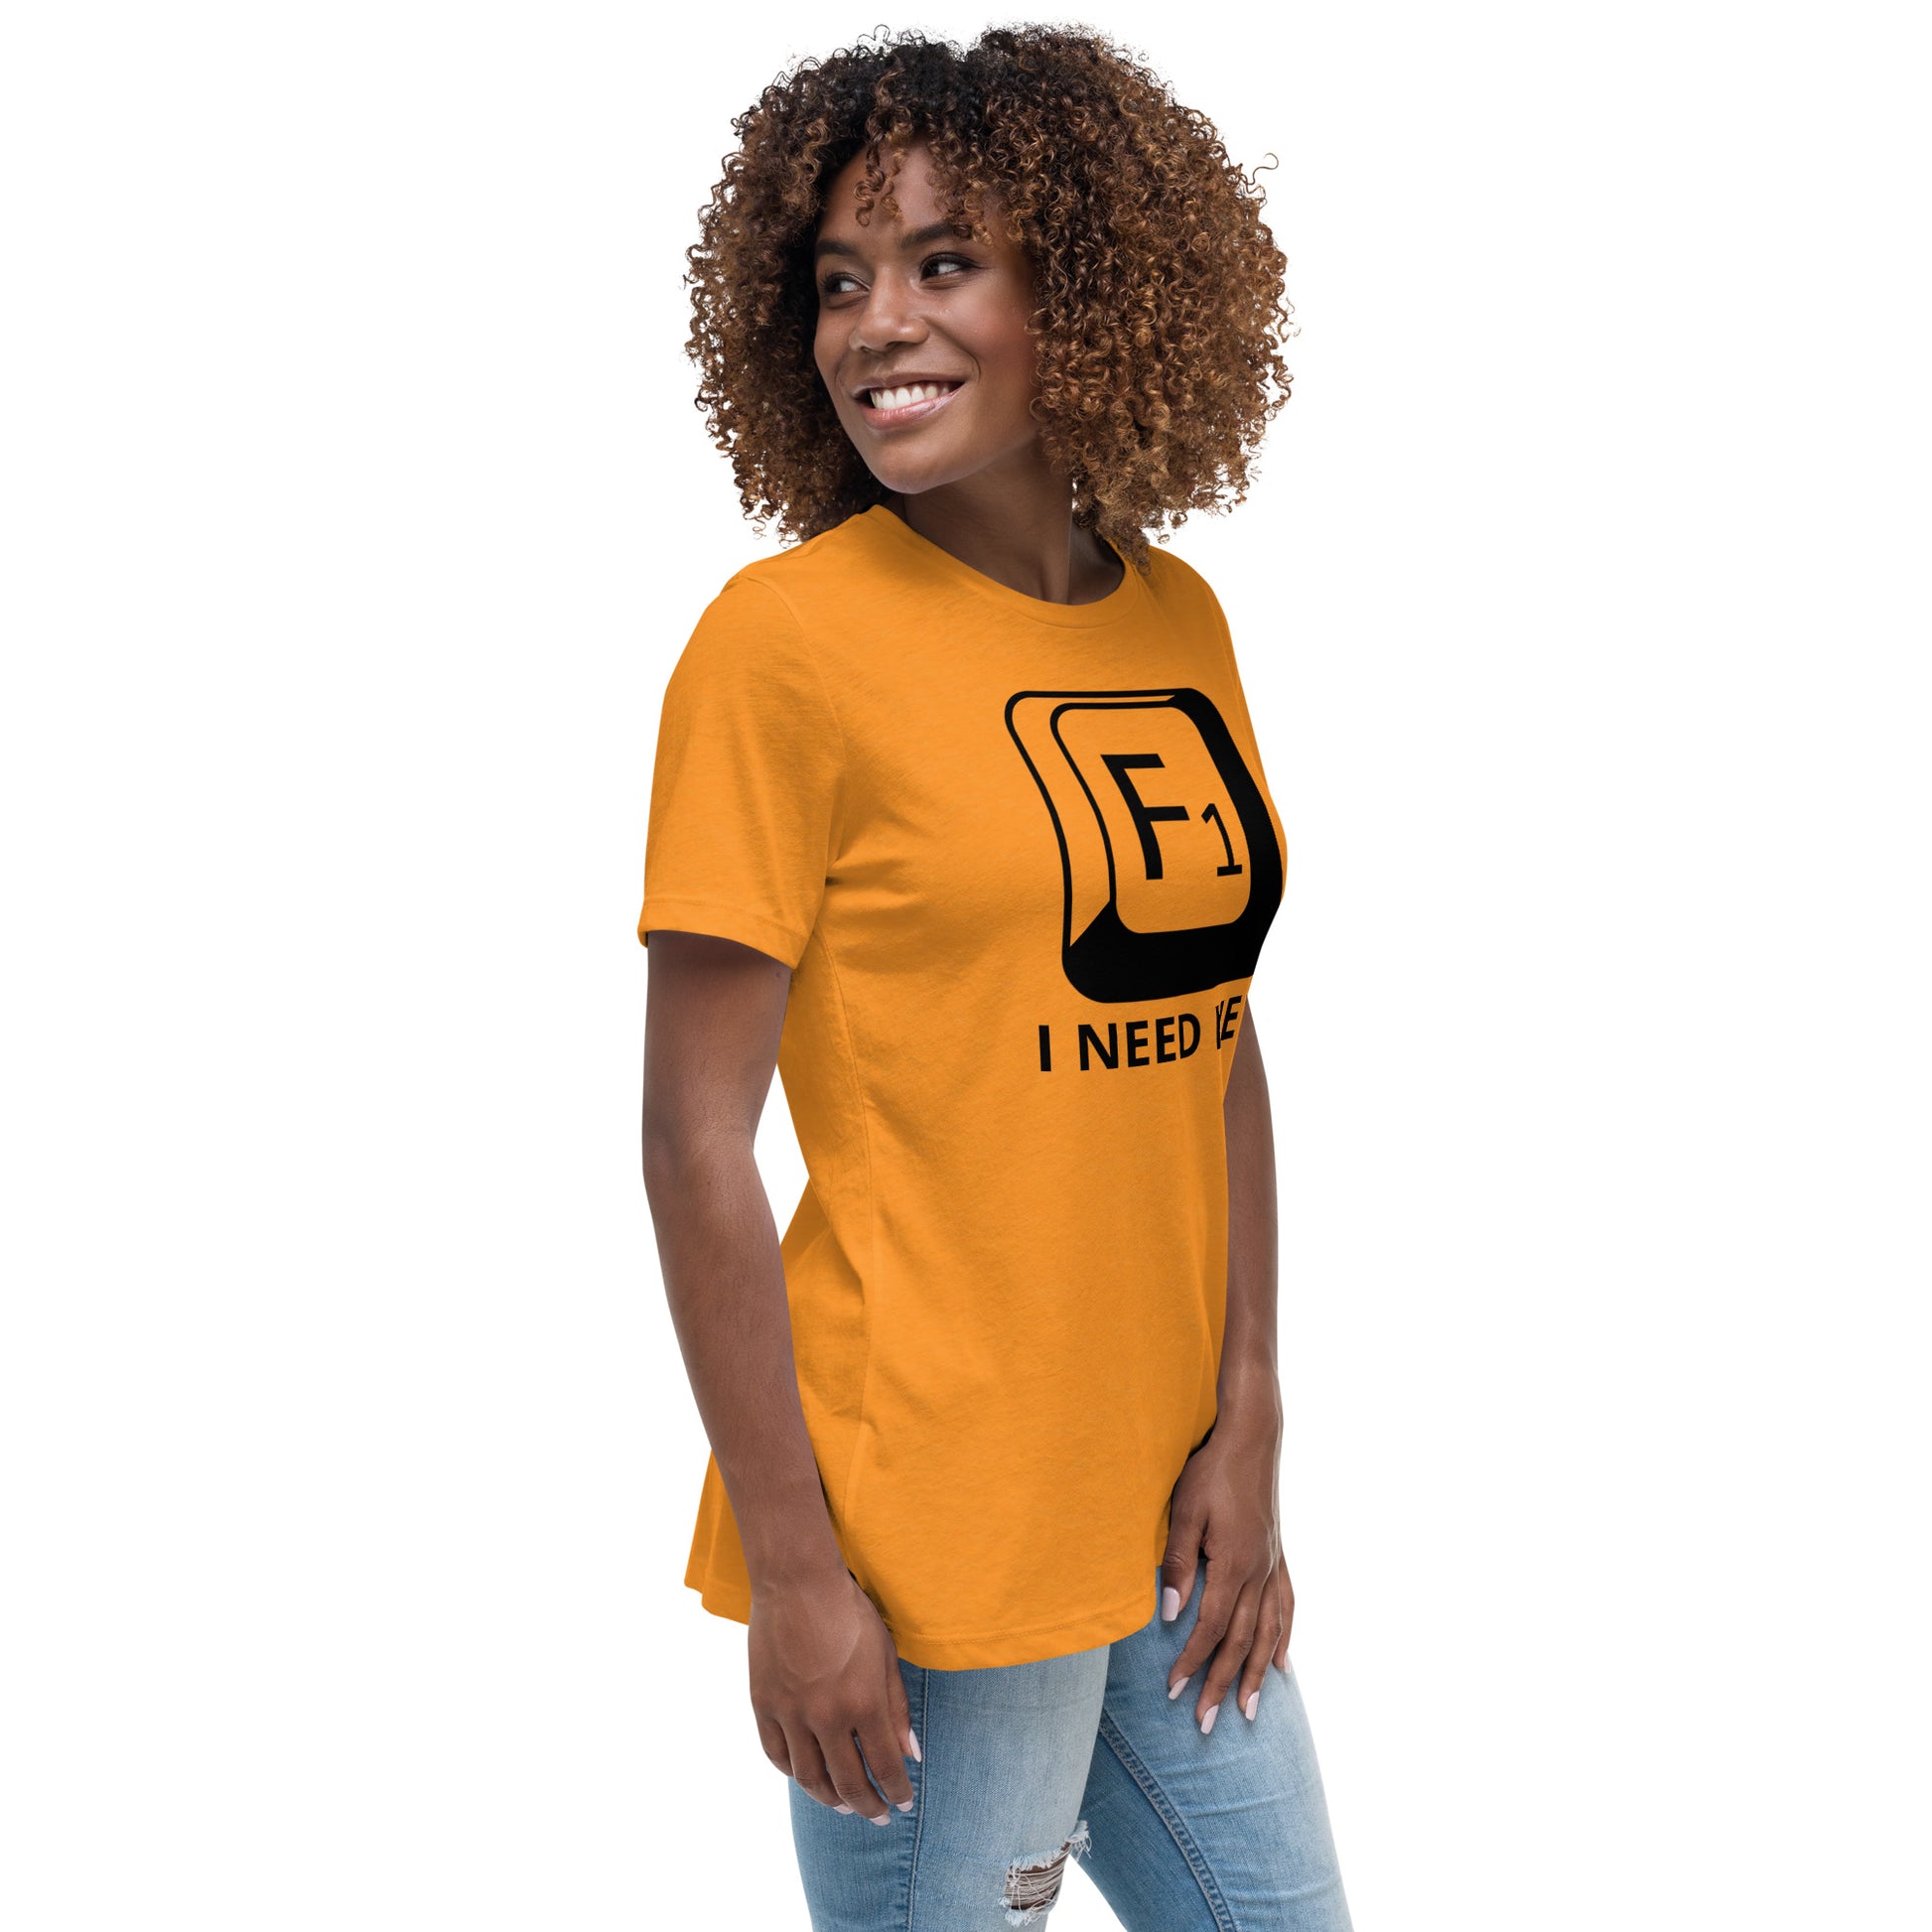 Woman with marmalade t-shirt with picture of "F1" key and text "I need help"